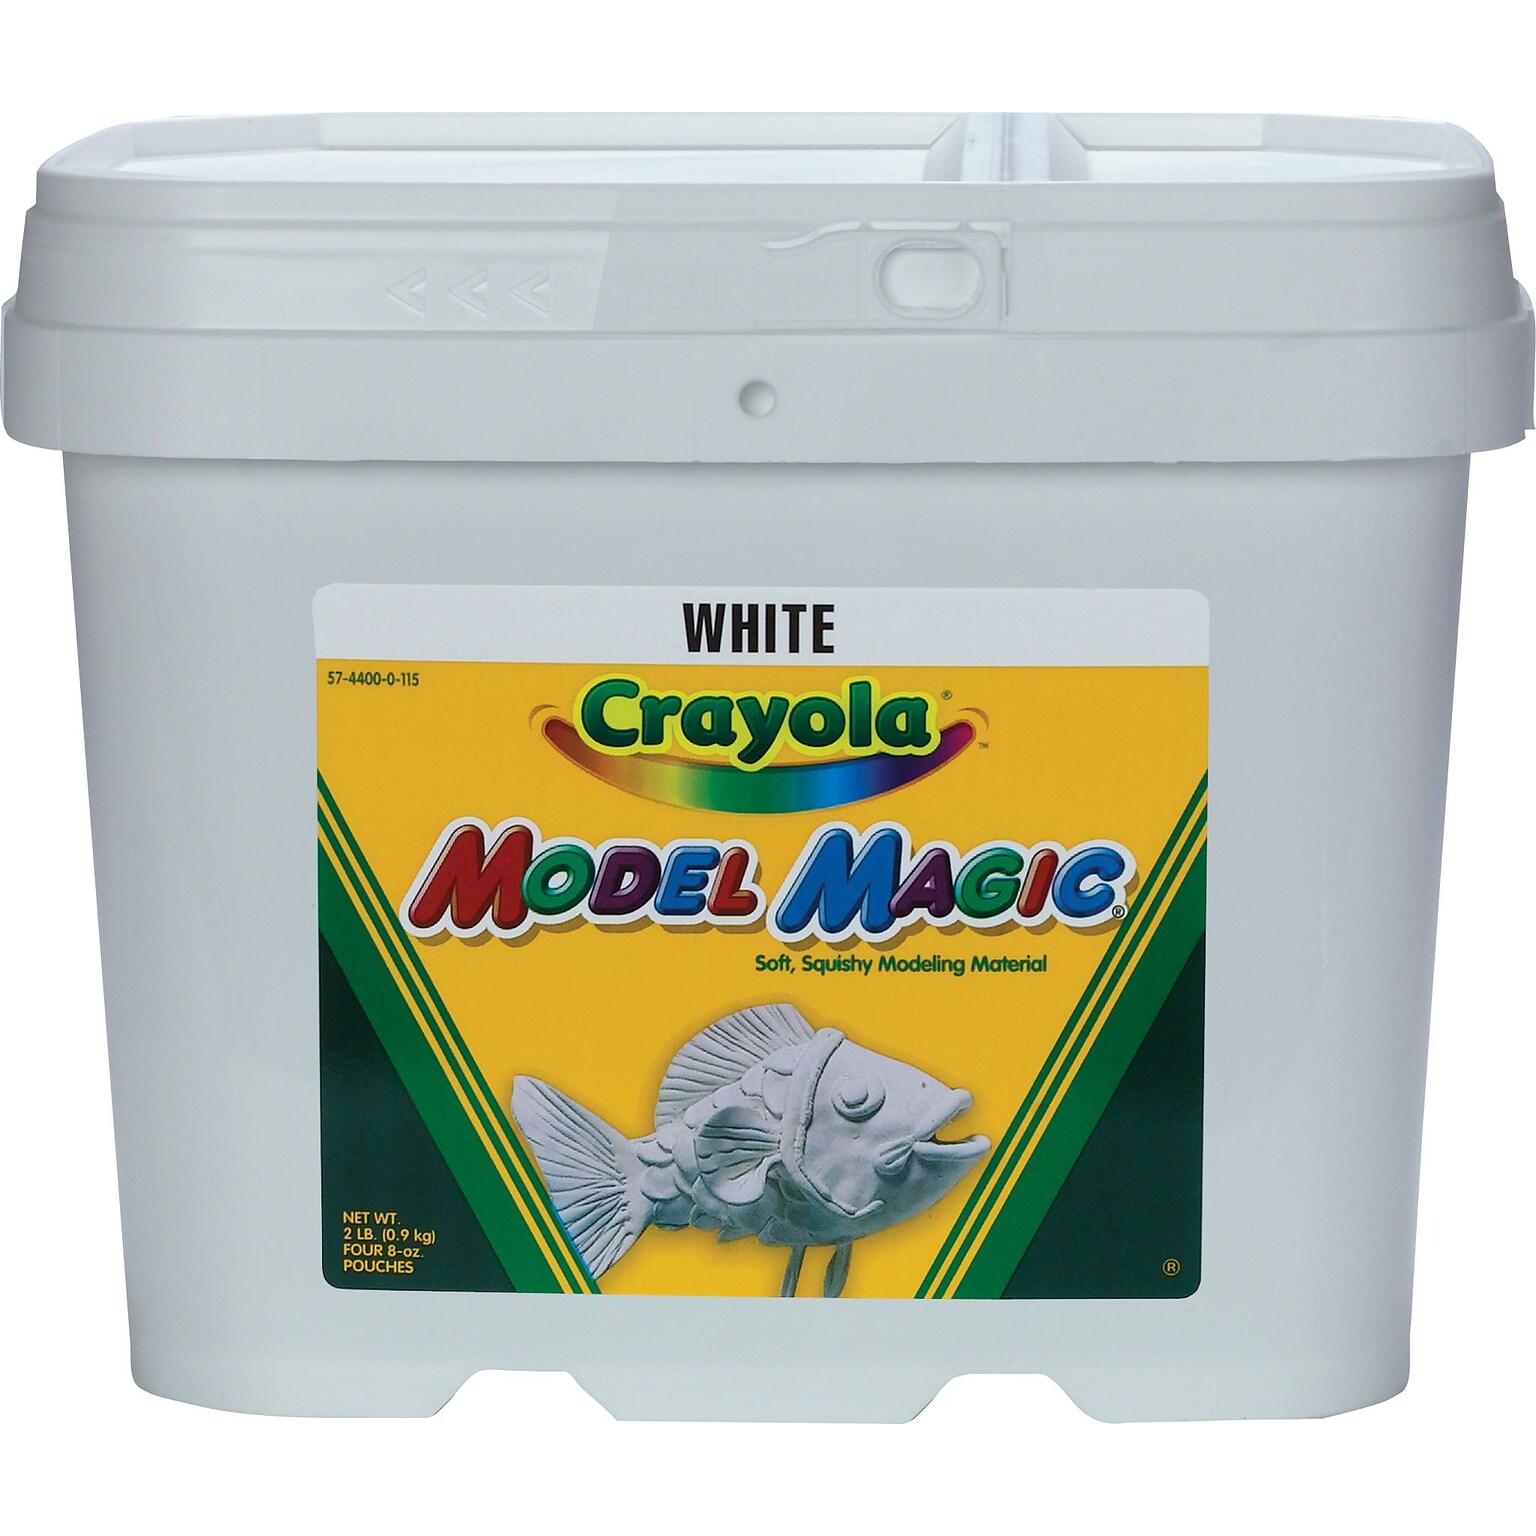 Crayola® Model Magic Value Pack; White, 8 oz. Packages, 12/Ct